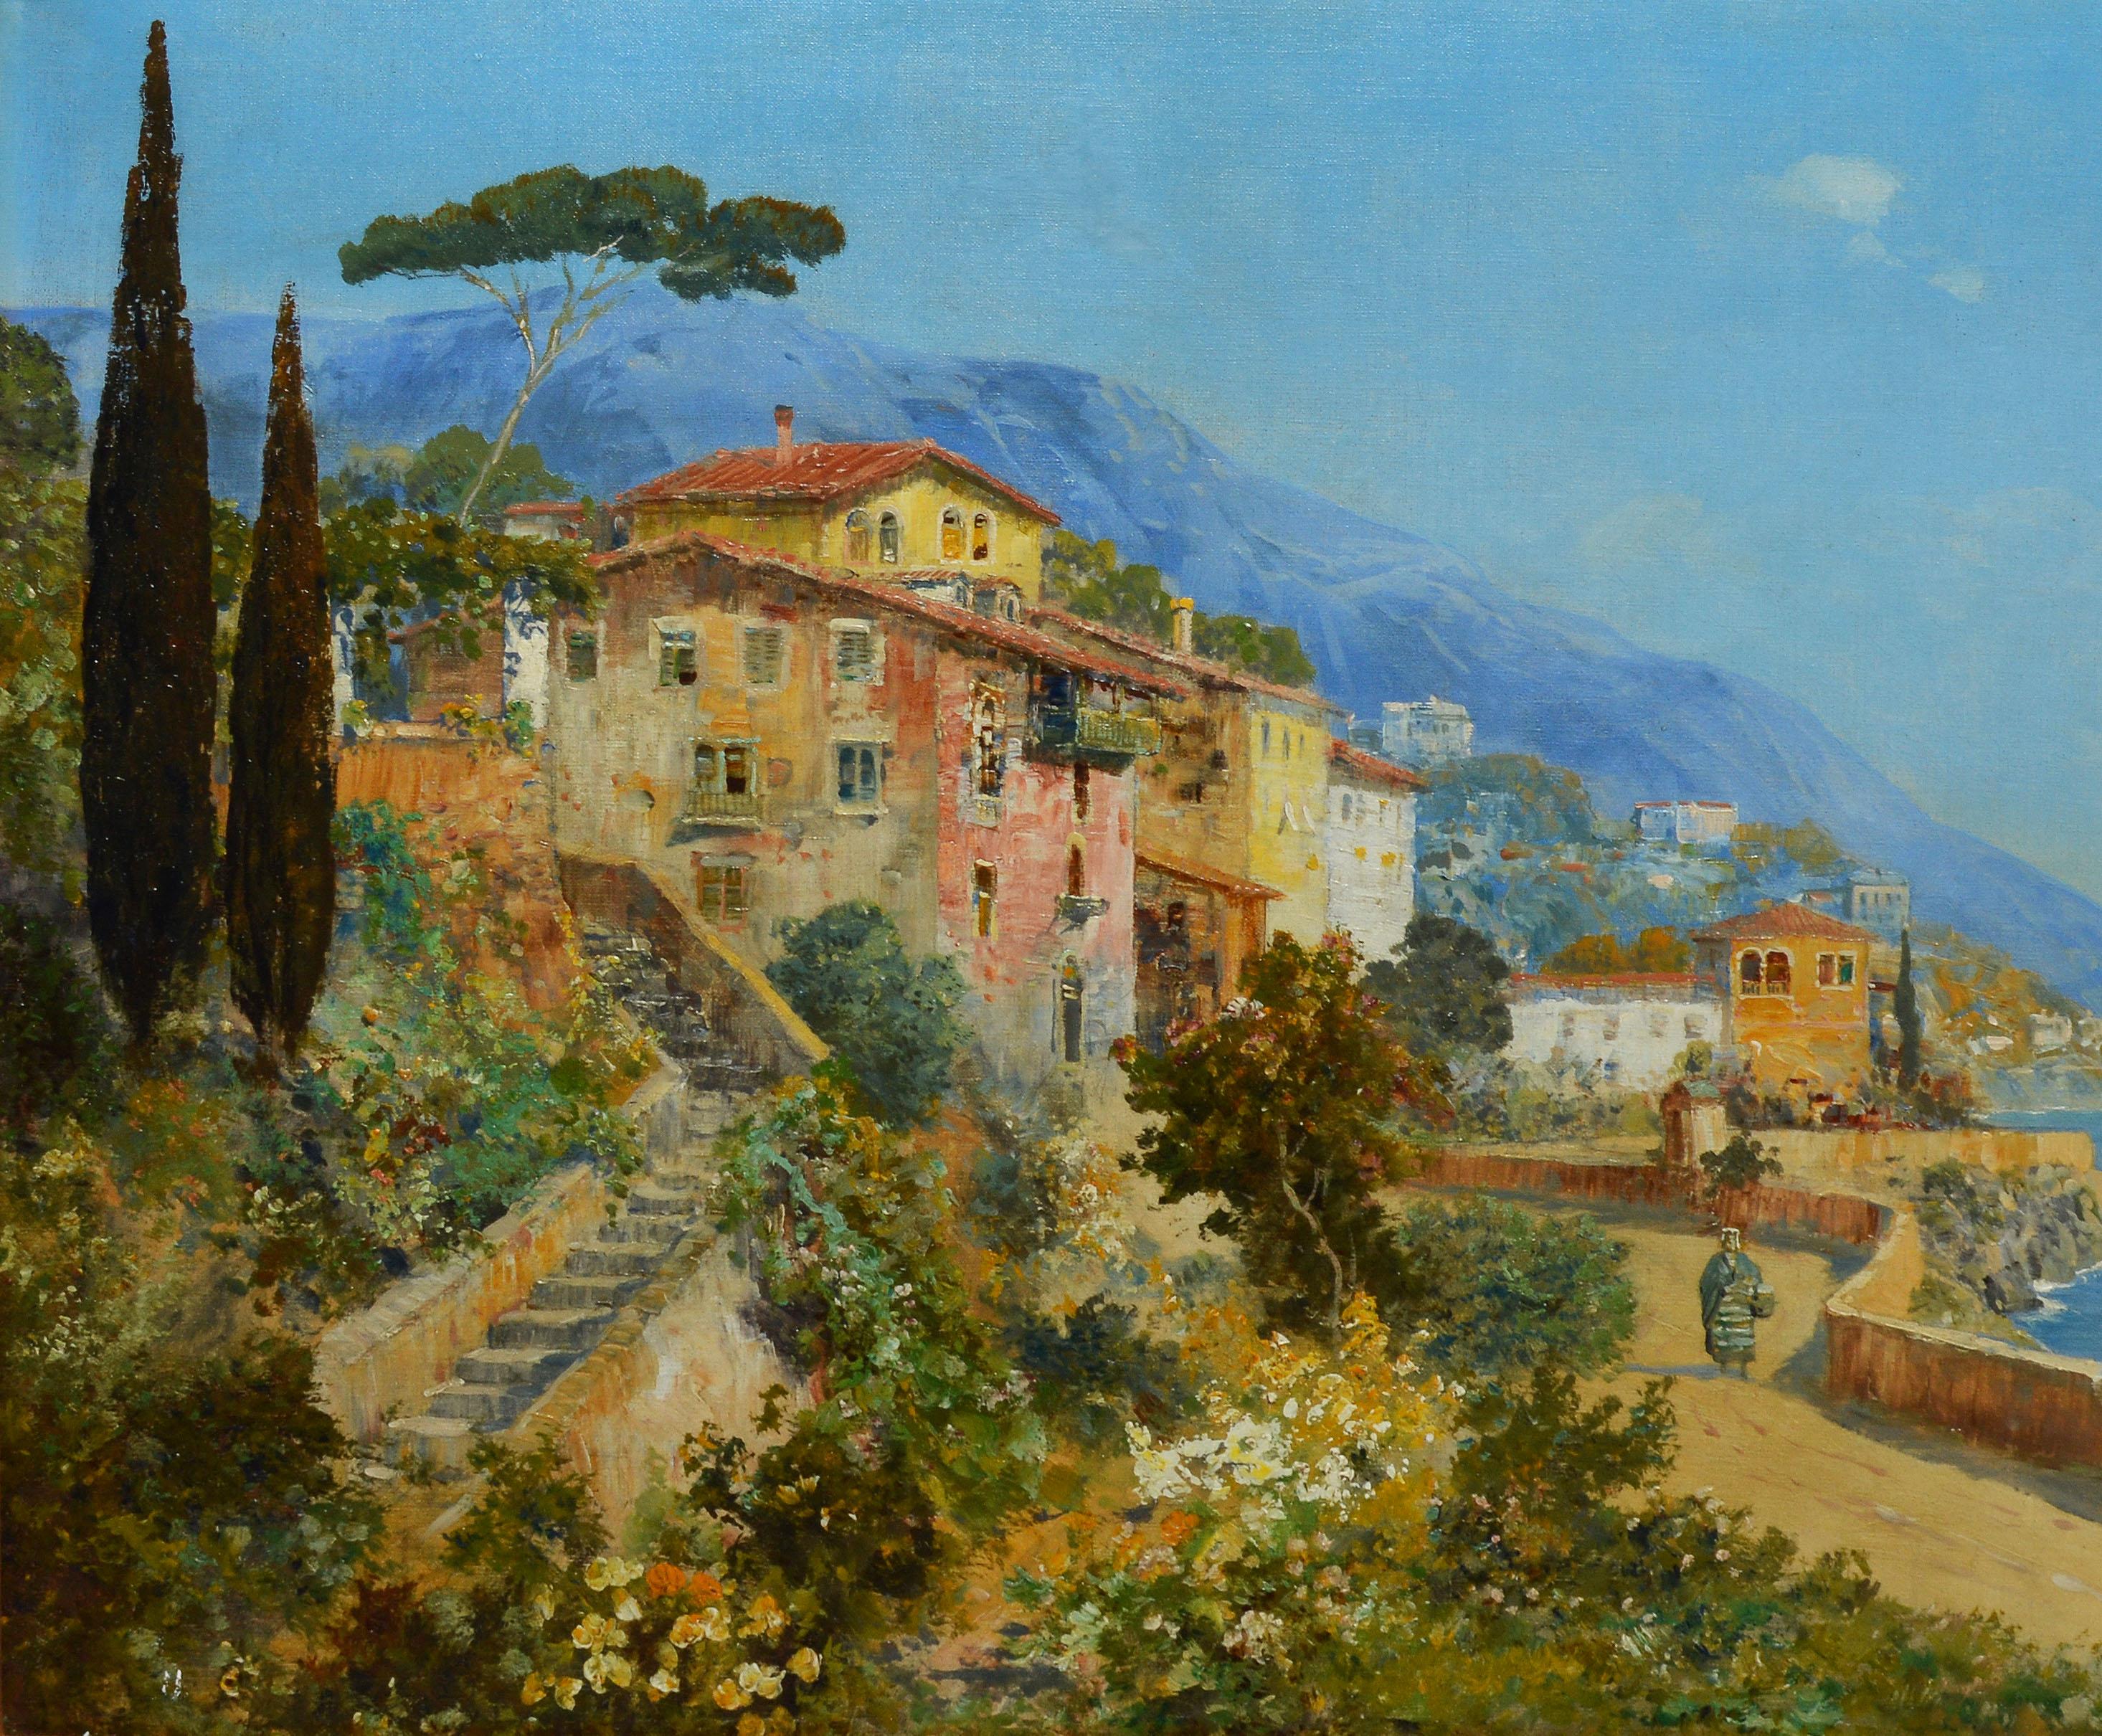 Impressionist view of Italy by Alois Arnegger  (1879 - 1967).  Oil on canvas, circa 1910.  Signed lower right.  Displayed in a period giltwood frame.  Image size, 30